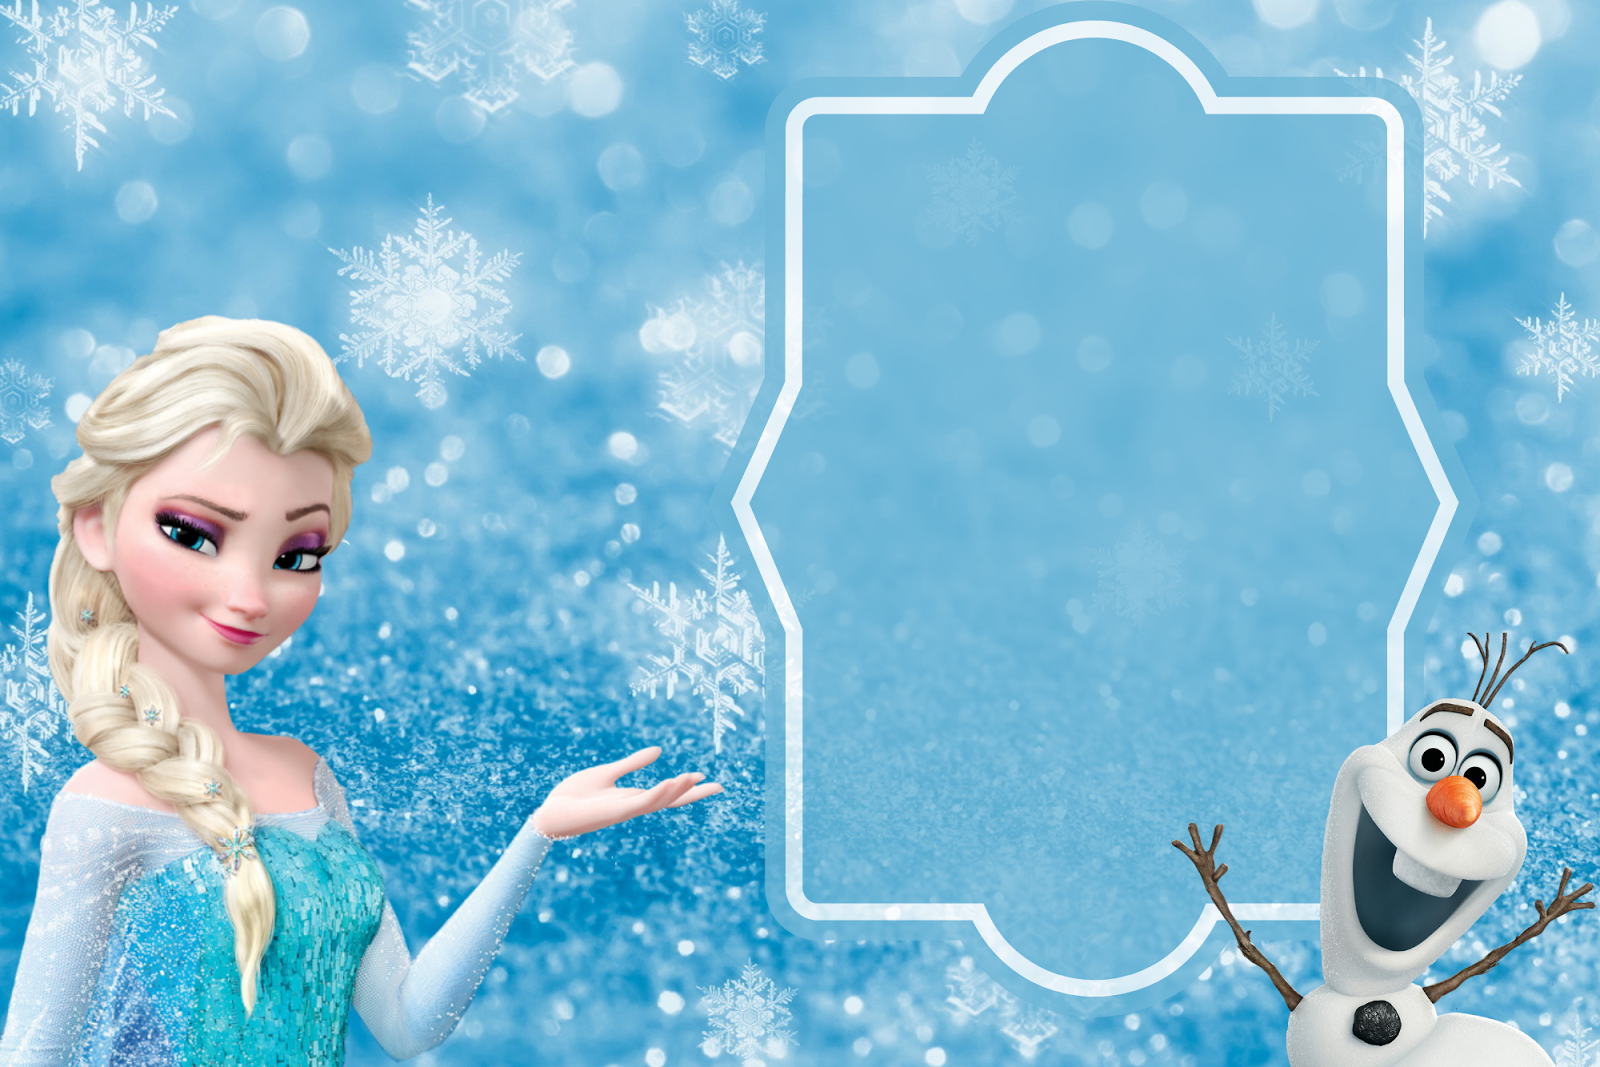 FREE Frozen Party Invitaiton Template download + Party Ideas and Inspiration